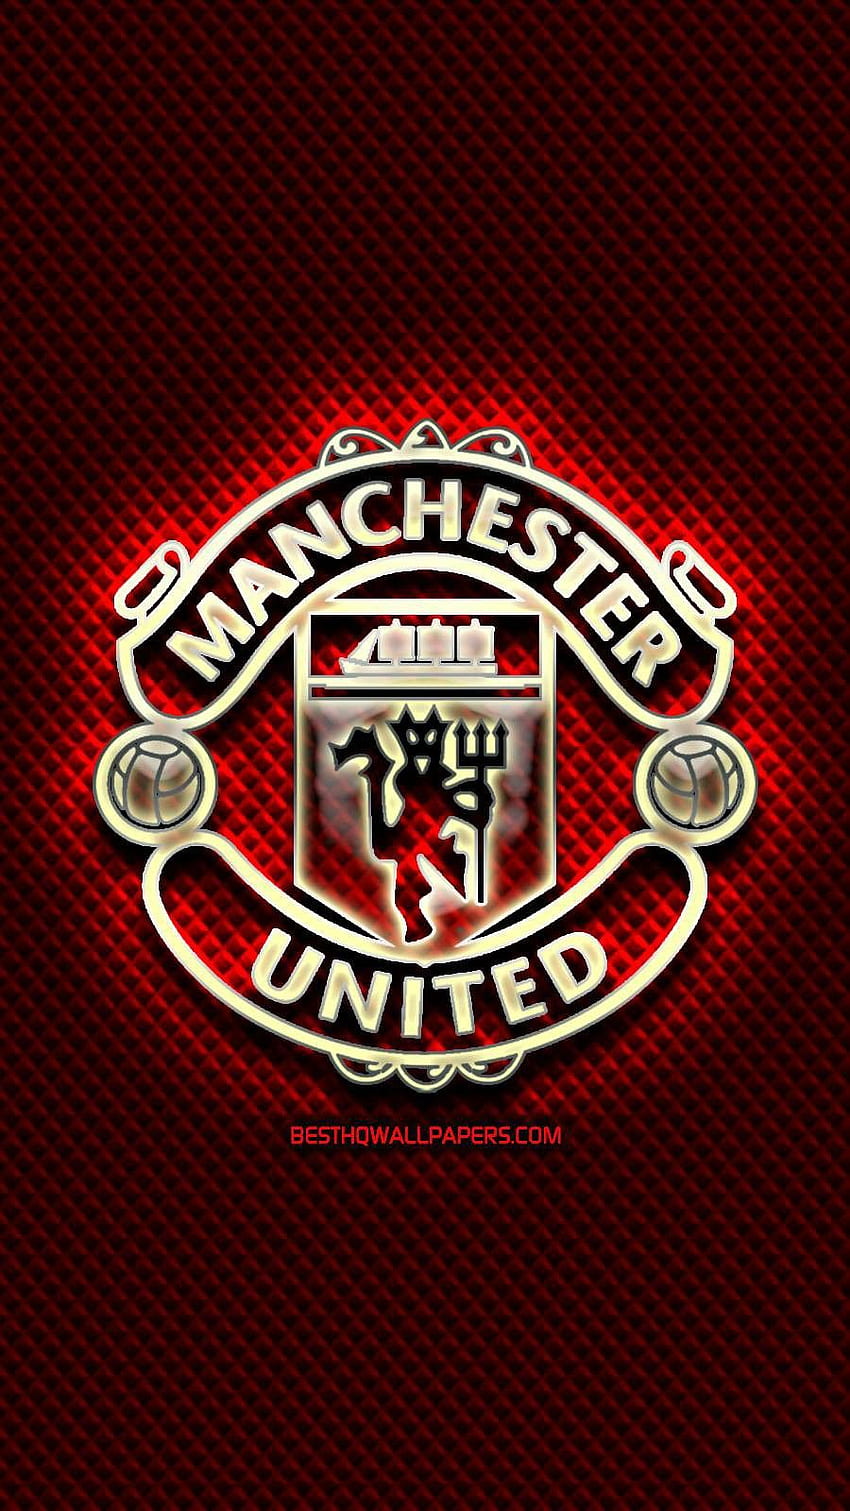 500+] Manchester United Backgrounds | Wallpapers.com